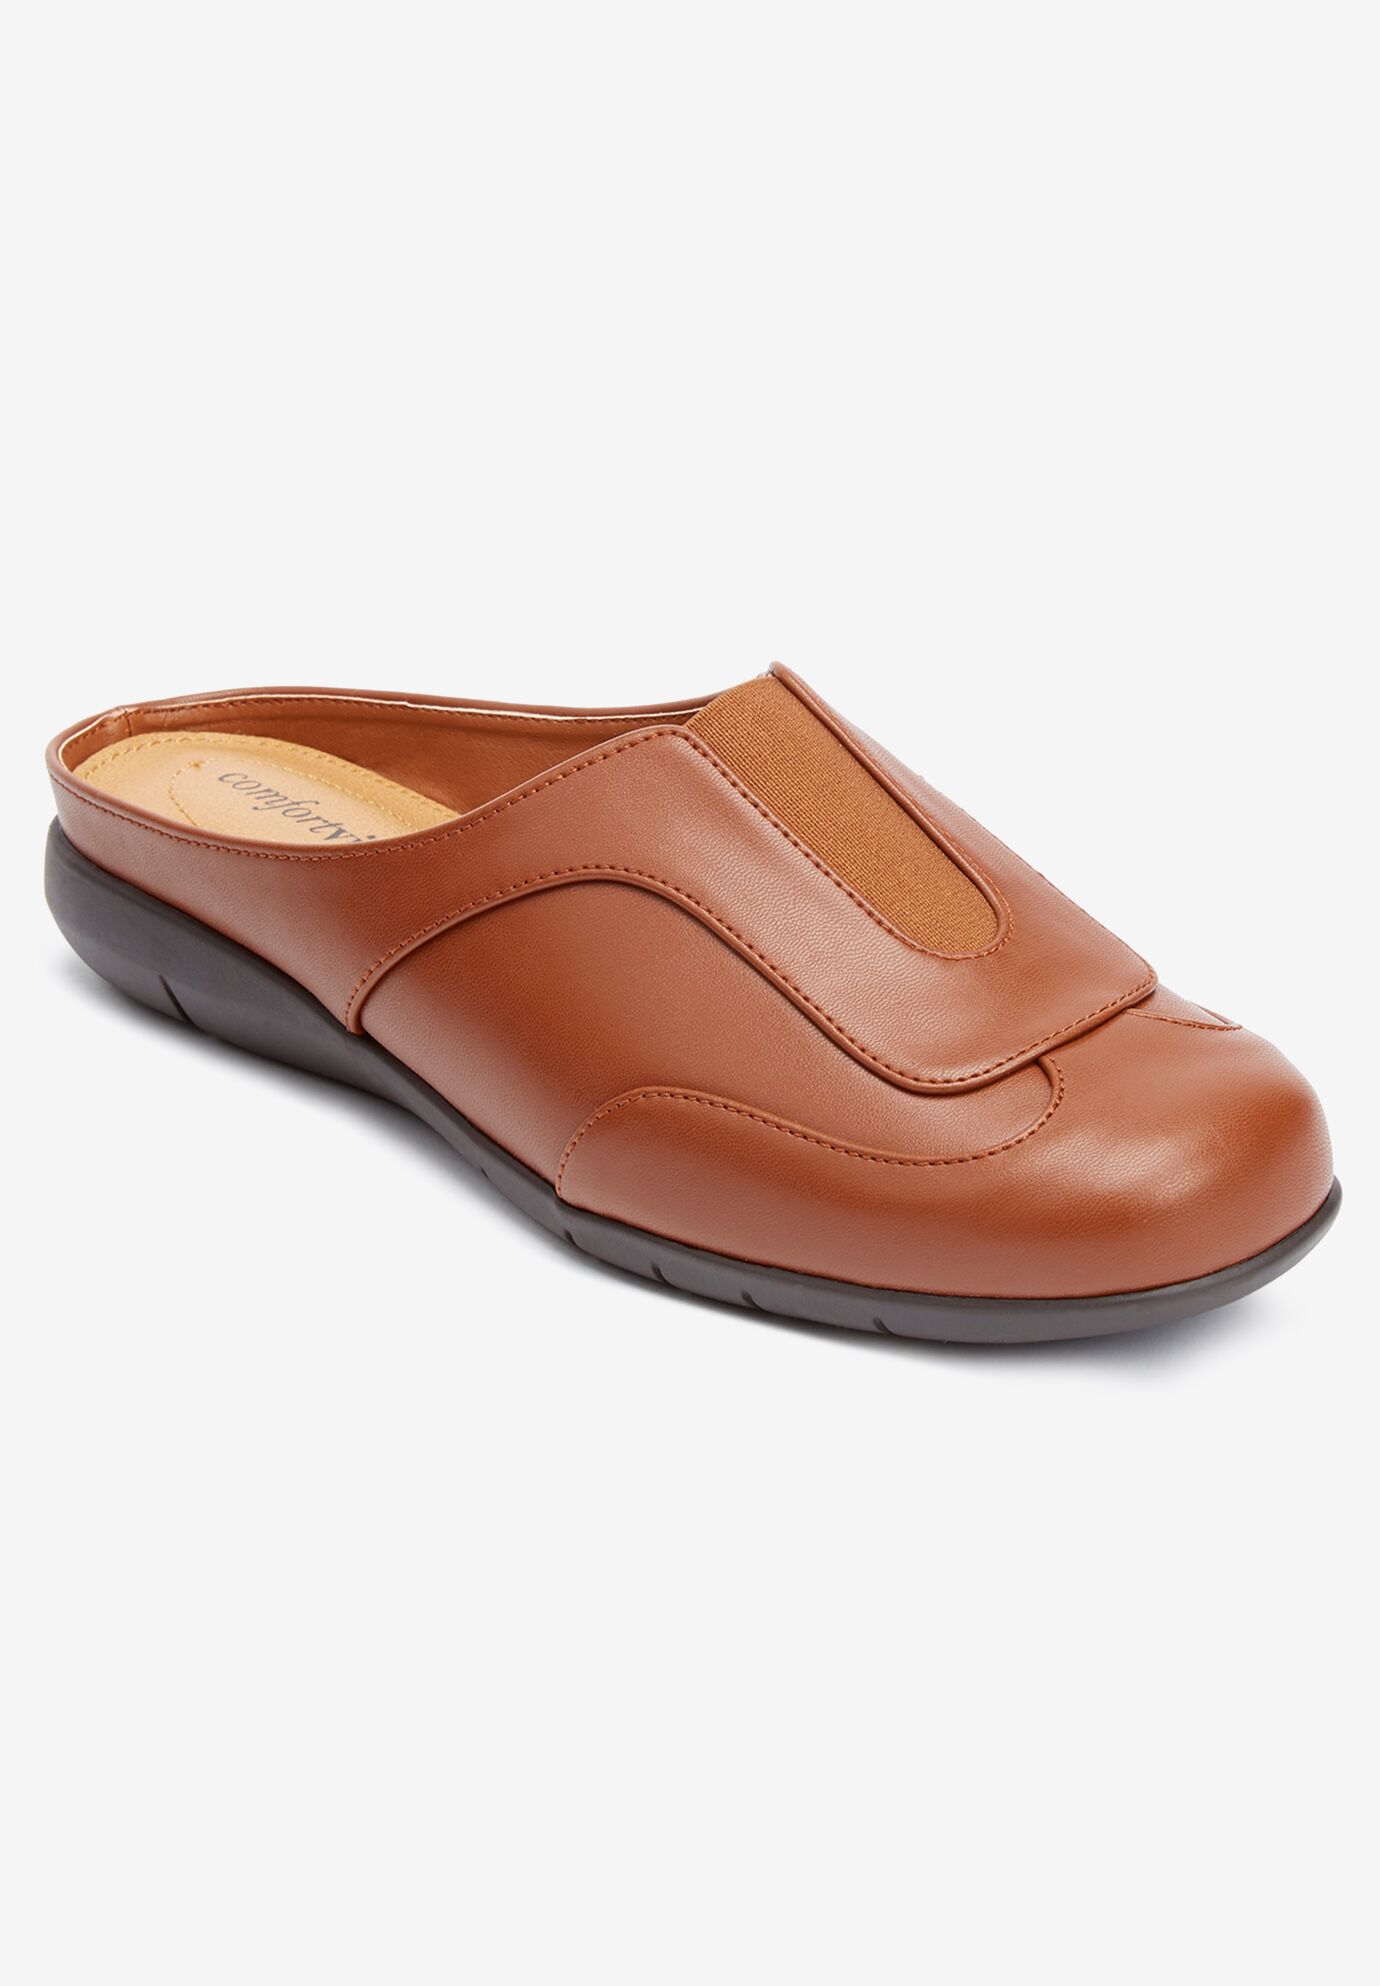 womens wide mules